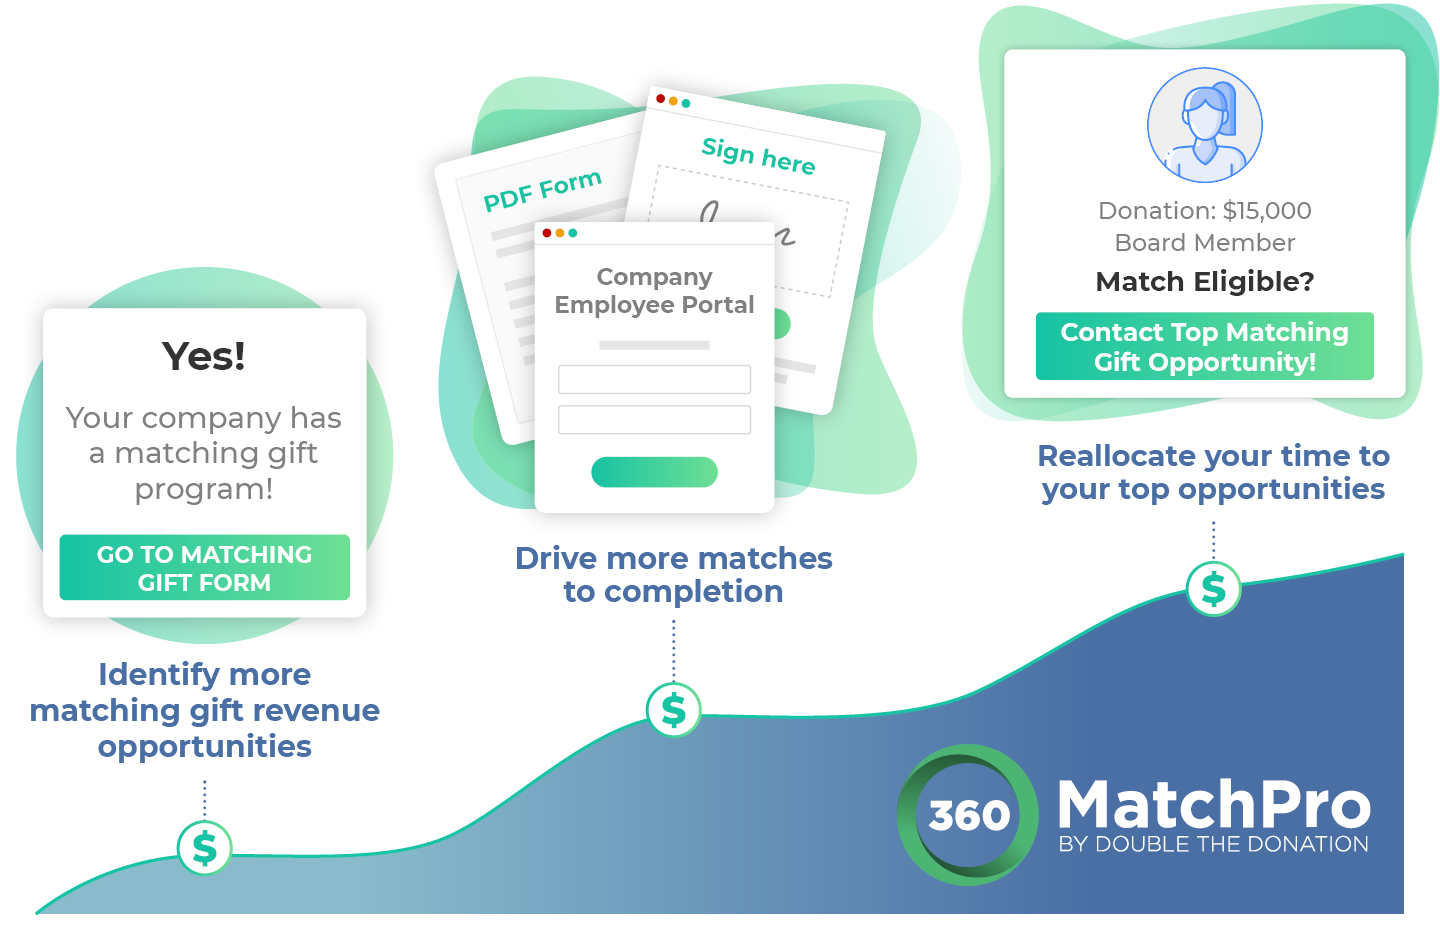 This image lists how 360MatchPro can add value to nonprofits. It also depicts a line graph that is meant to represent increasing donations.